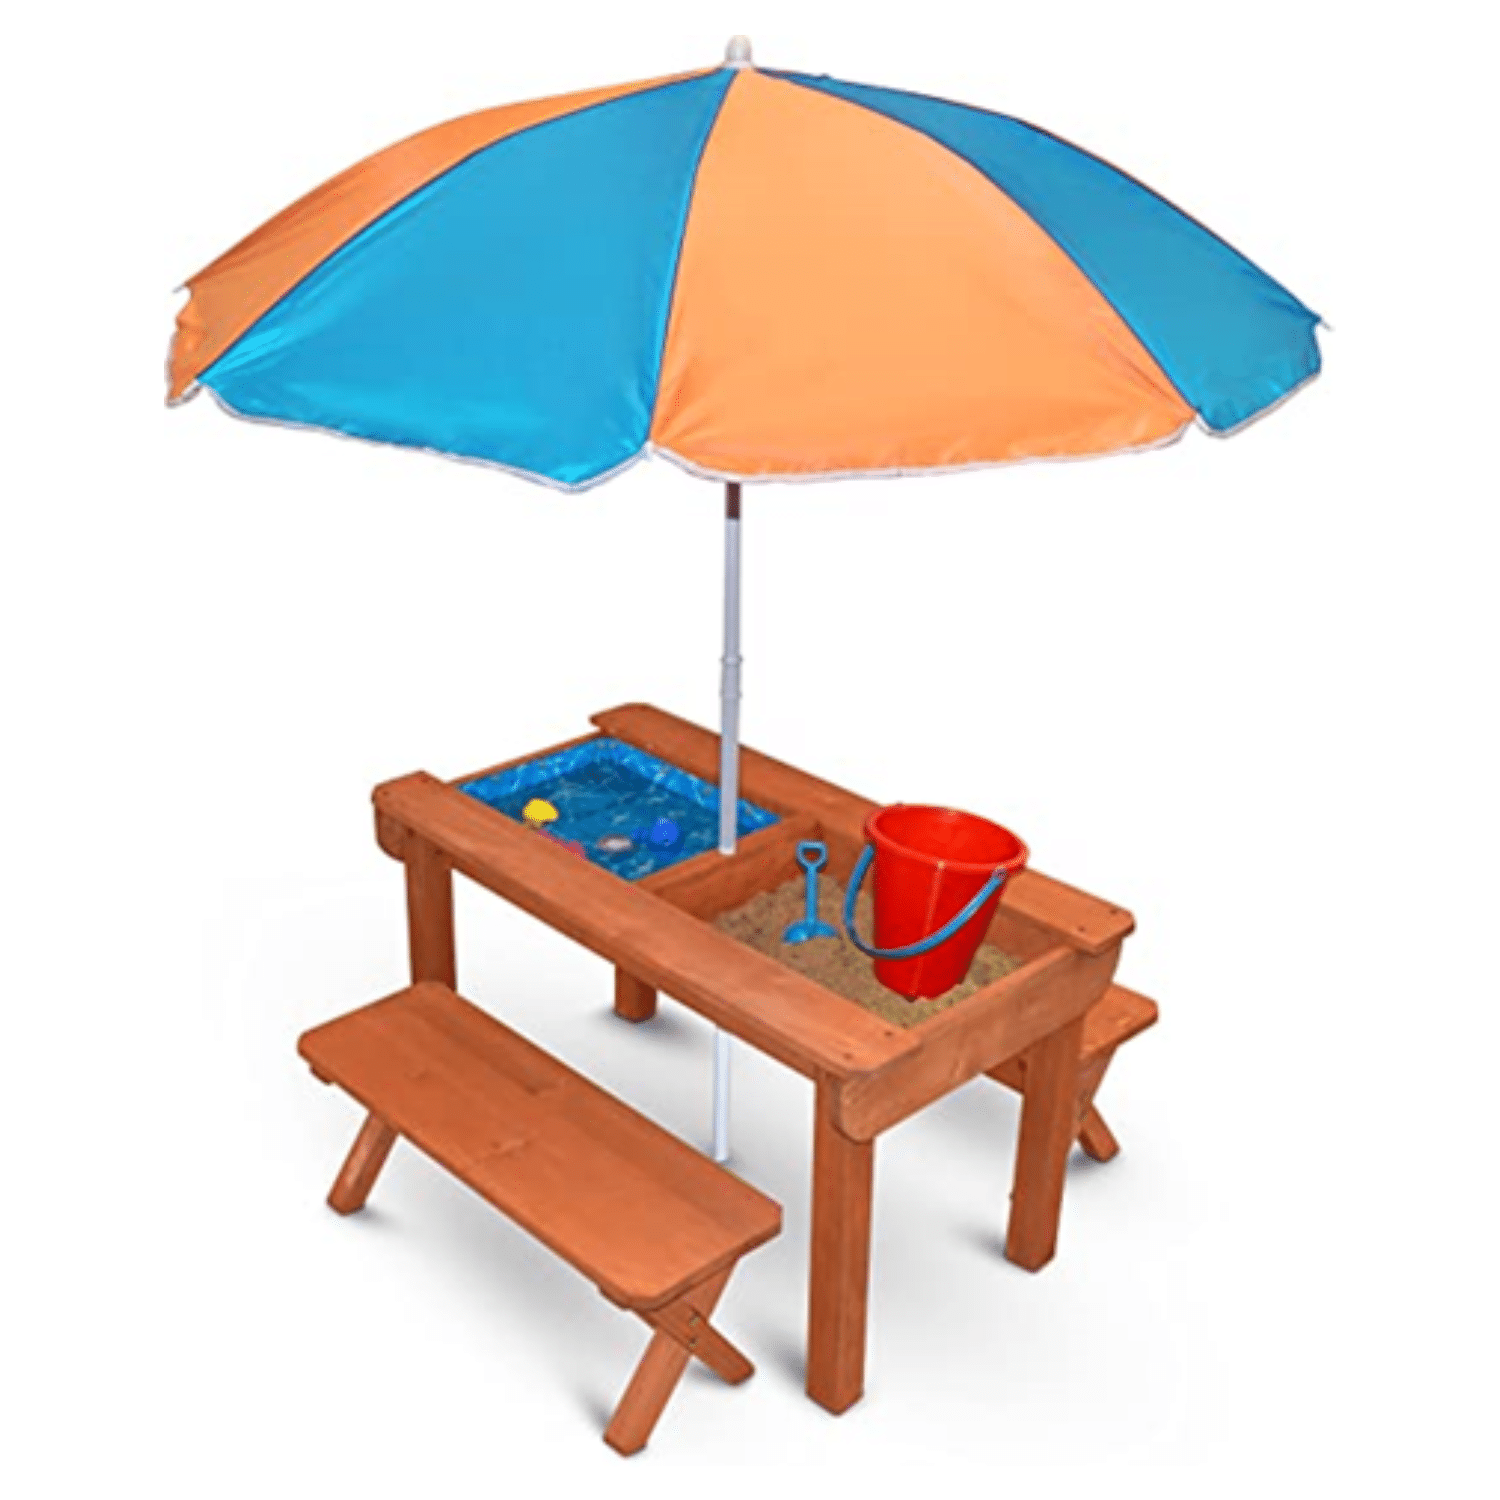 Sand and Water Wooden Picnic Table